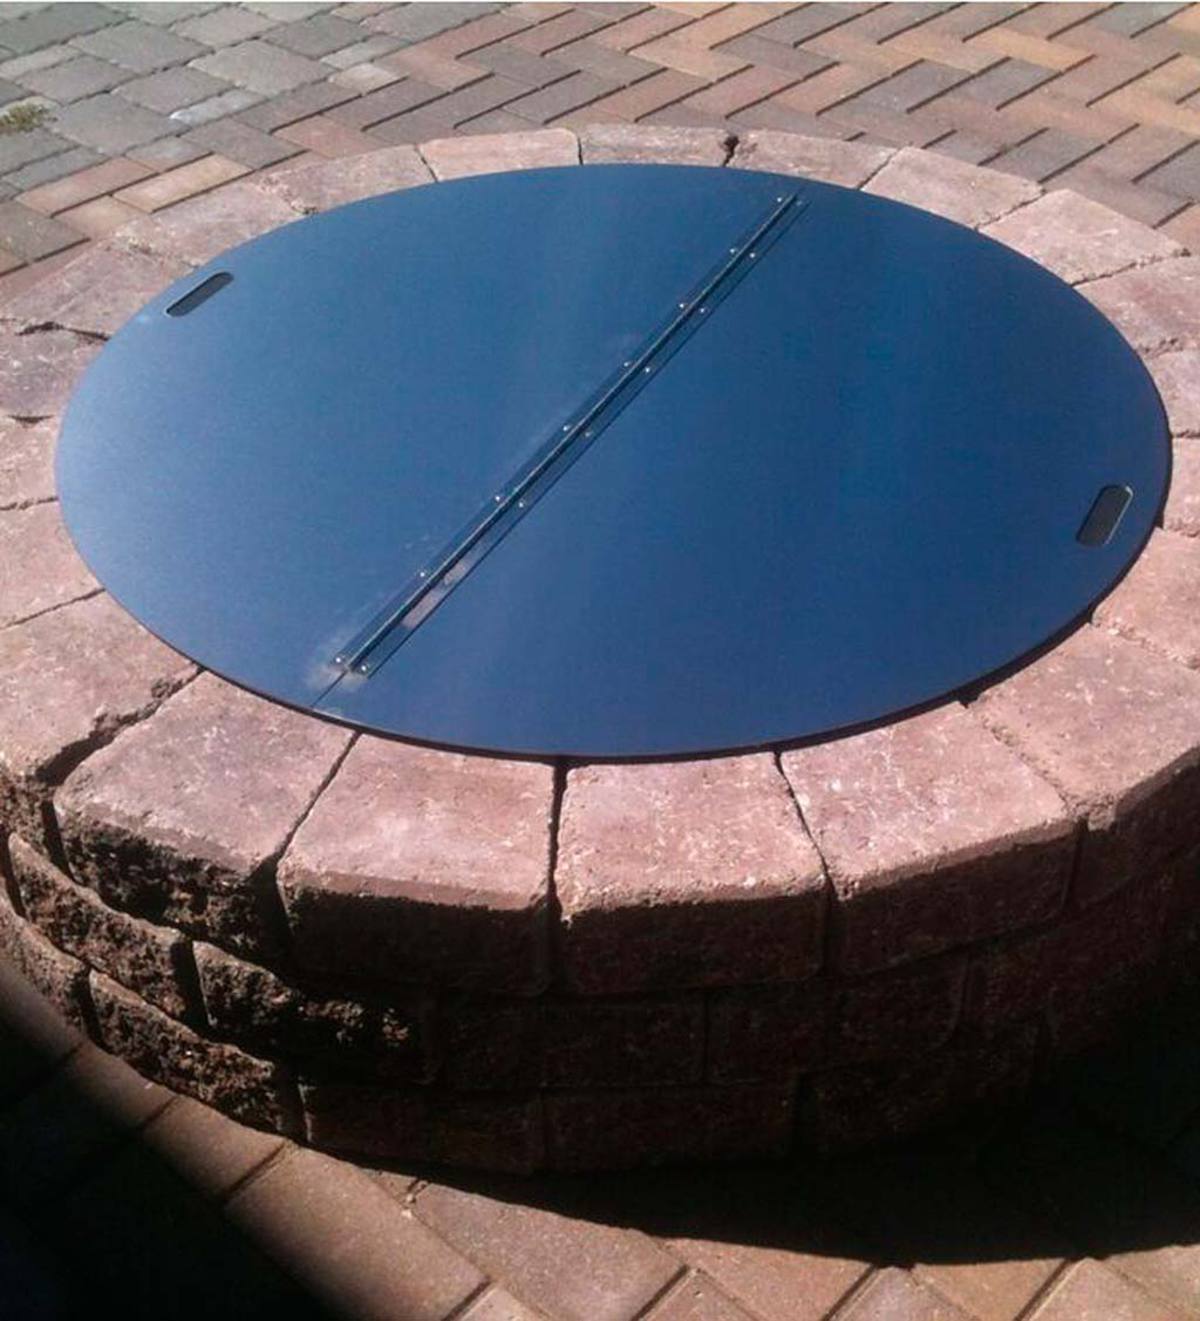 Stainless Steel Round Fire Pit Cover, 34 Inch Fire Pit Cover